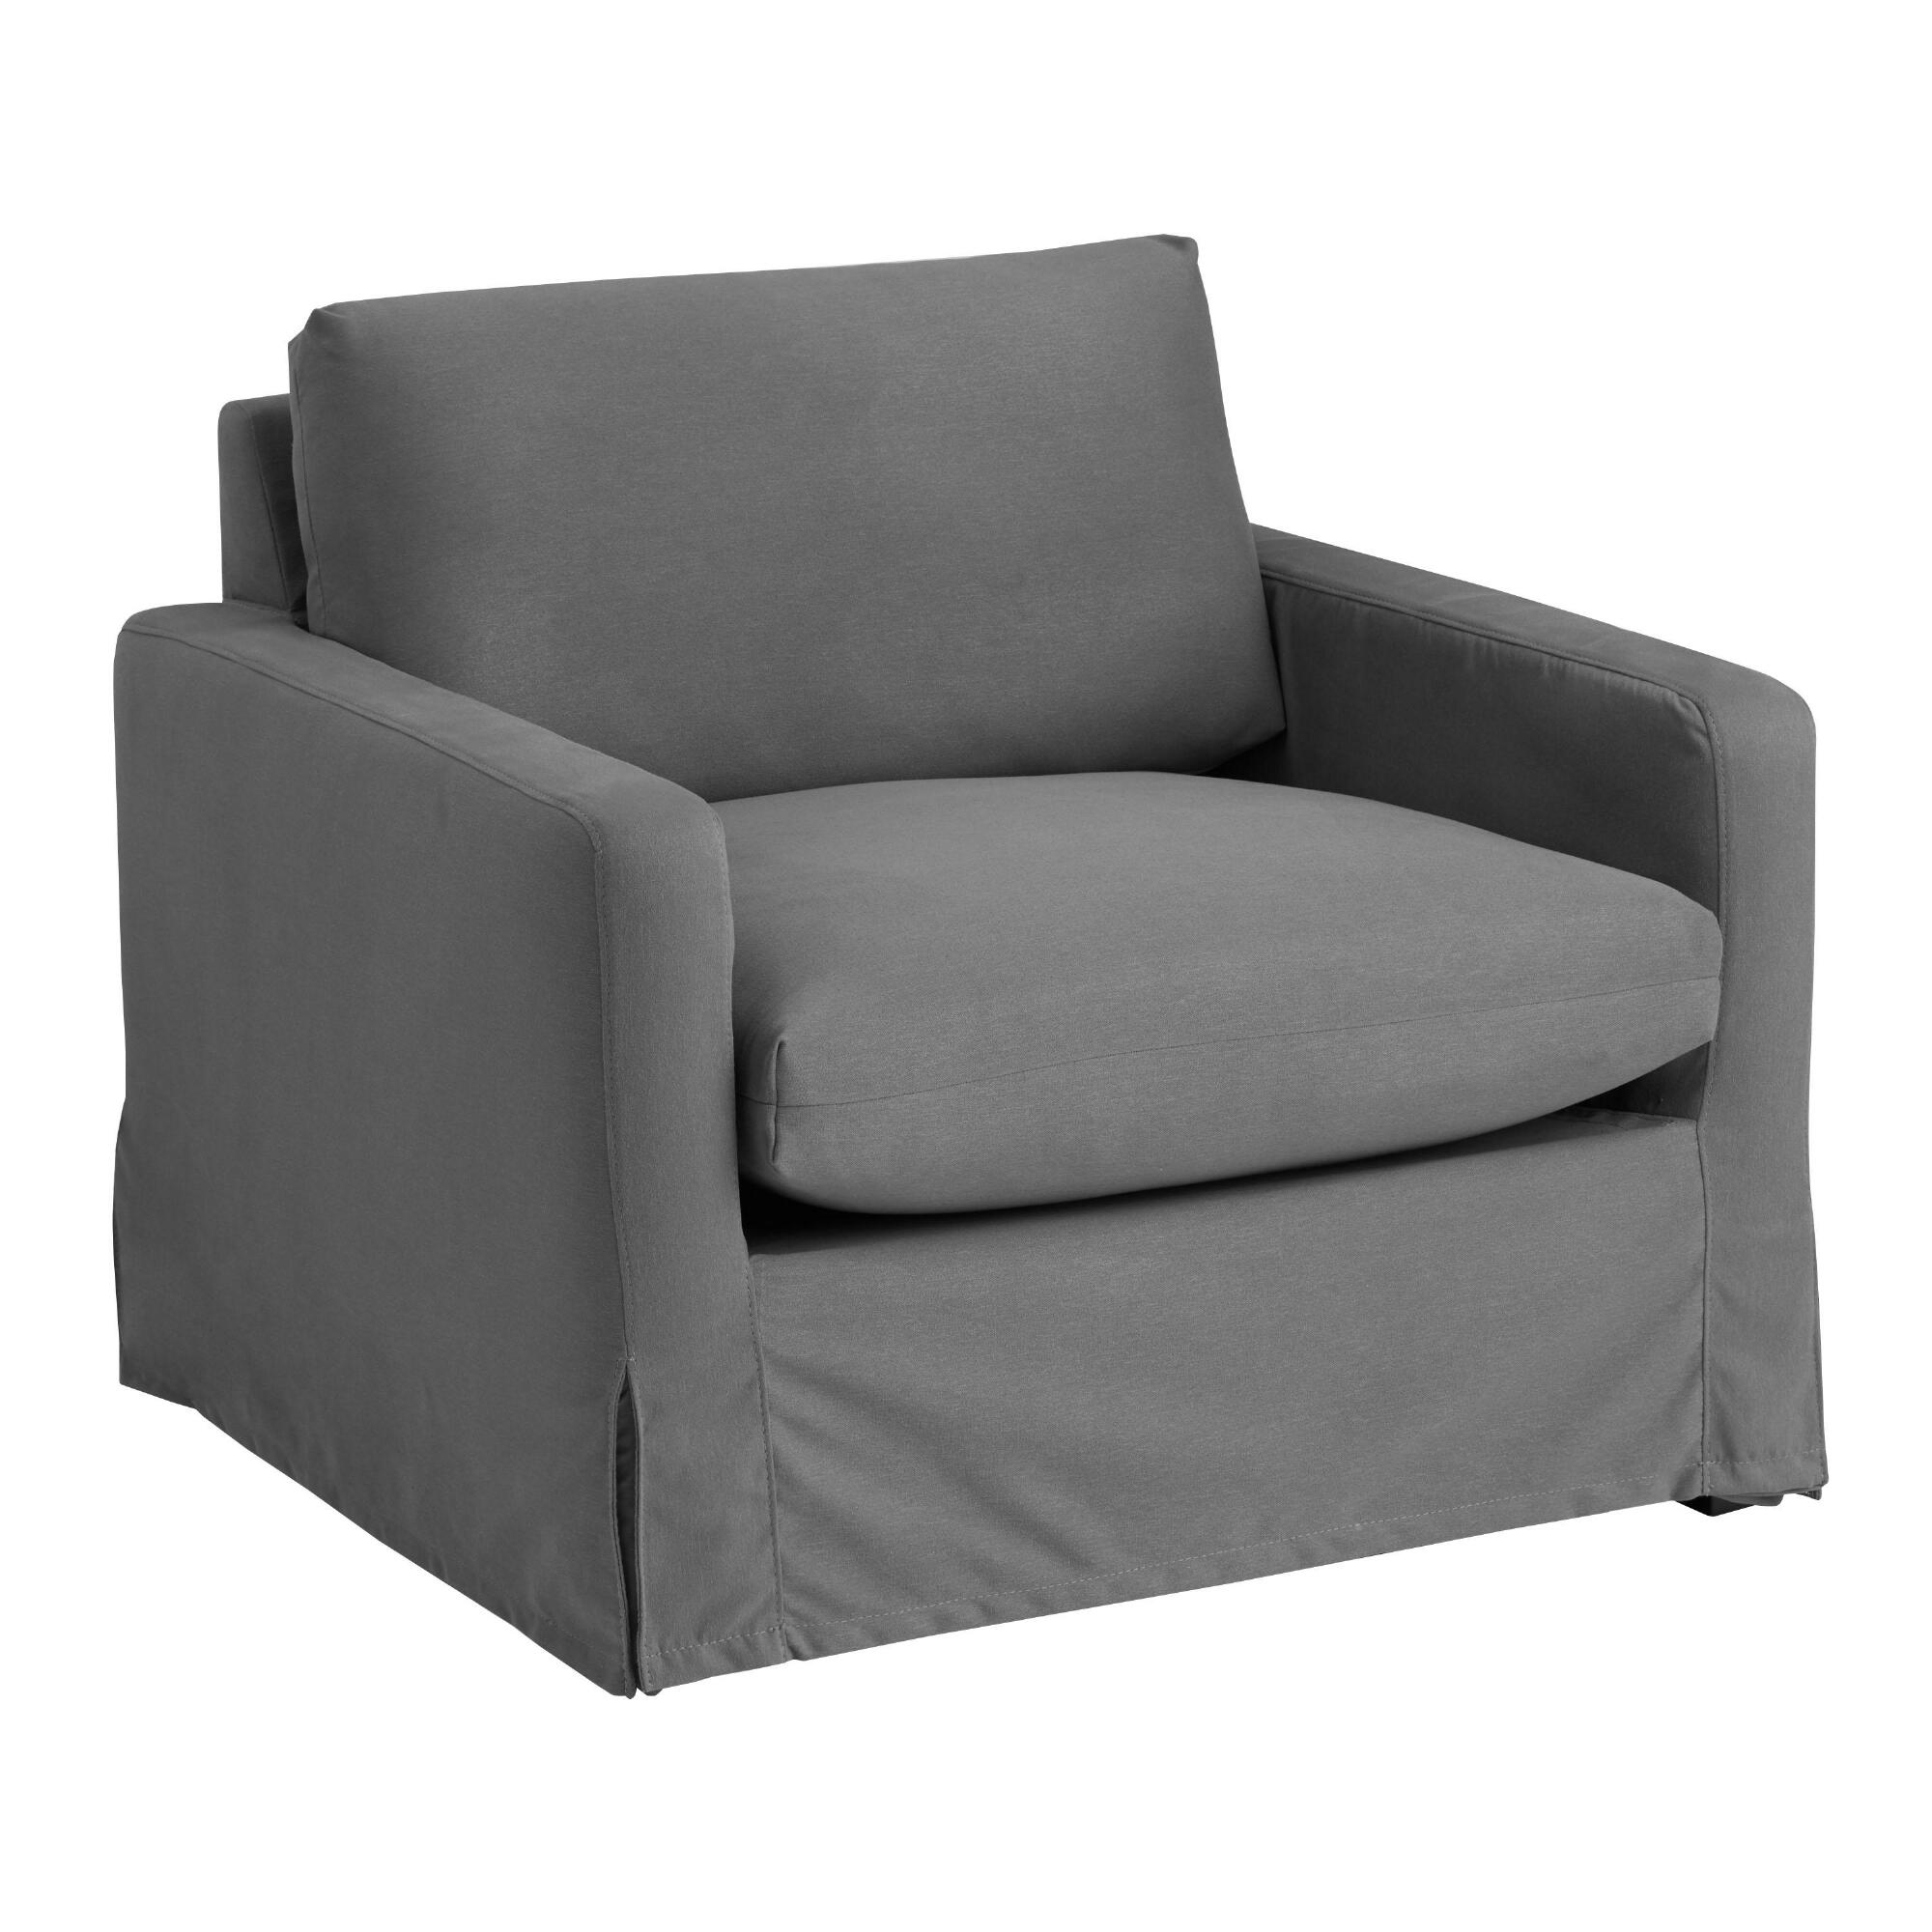 Chandler Slipcover Chair: Gray - Polyester by World Market